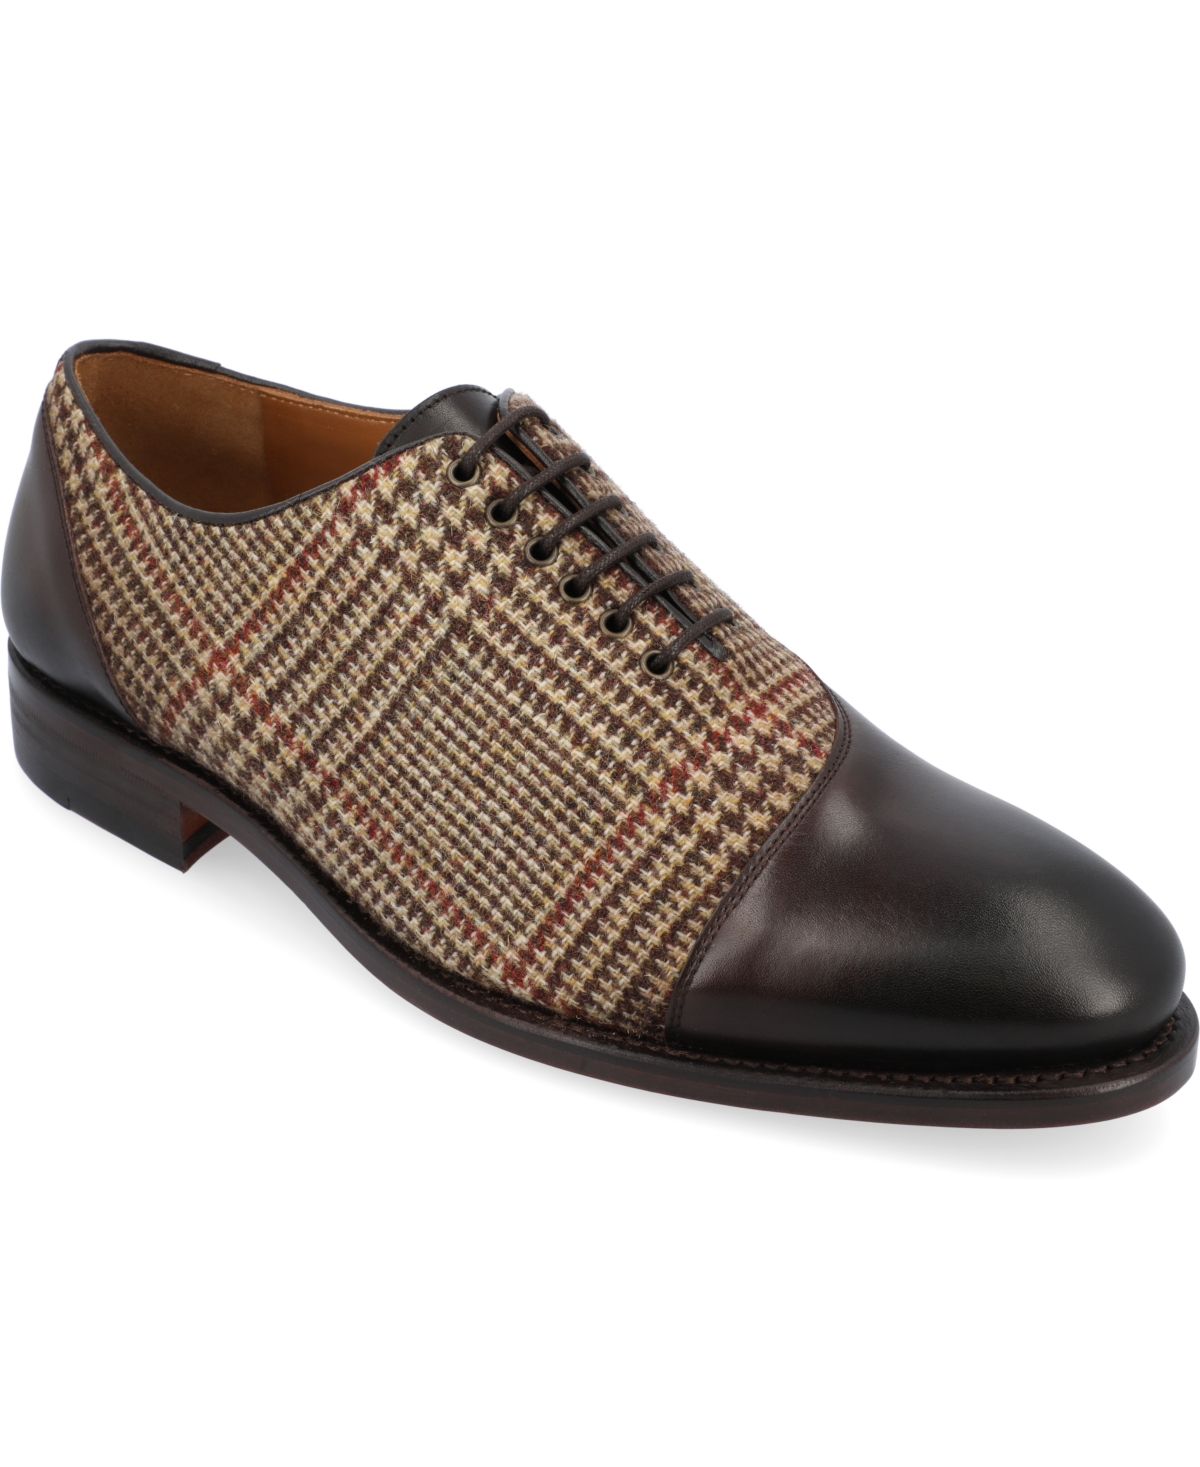 Shop Taft Men's Paris Handcrafted Leather And Wool Asymmetrical Oxford Lace-up Dress Shoes In Plaid